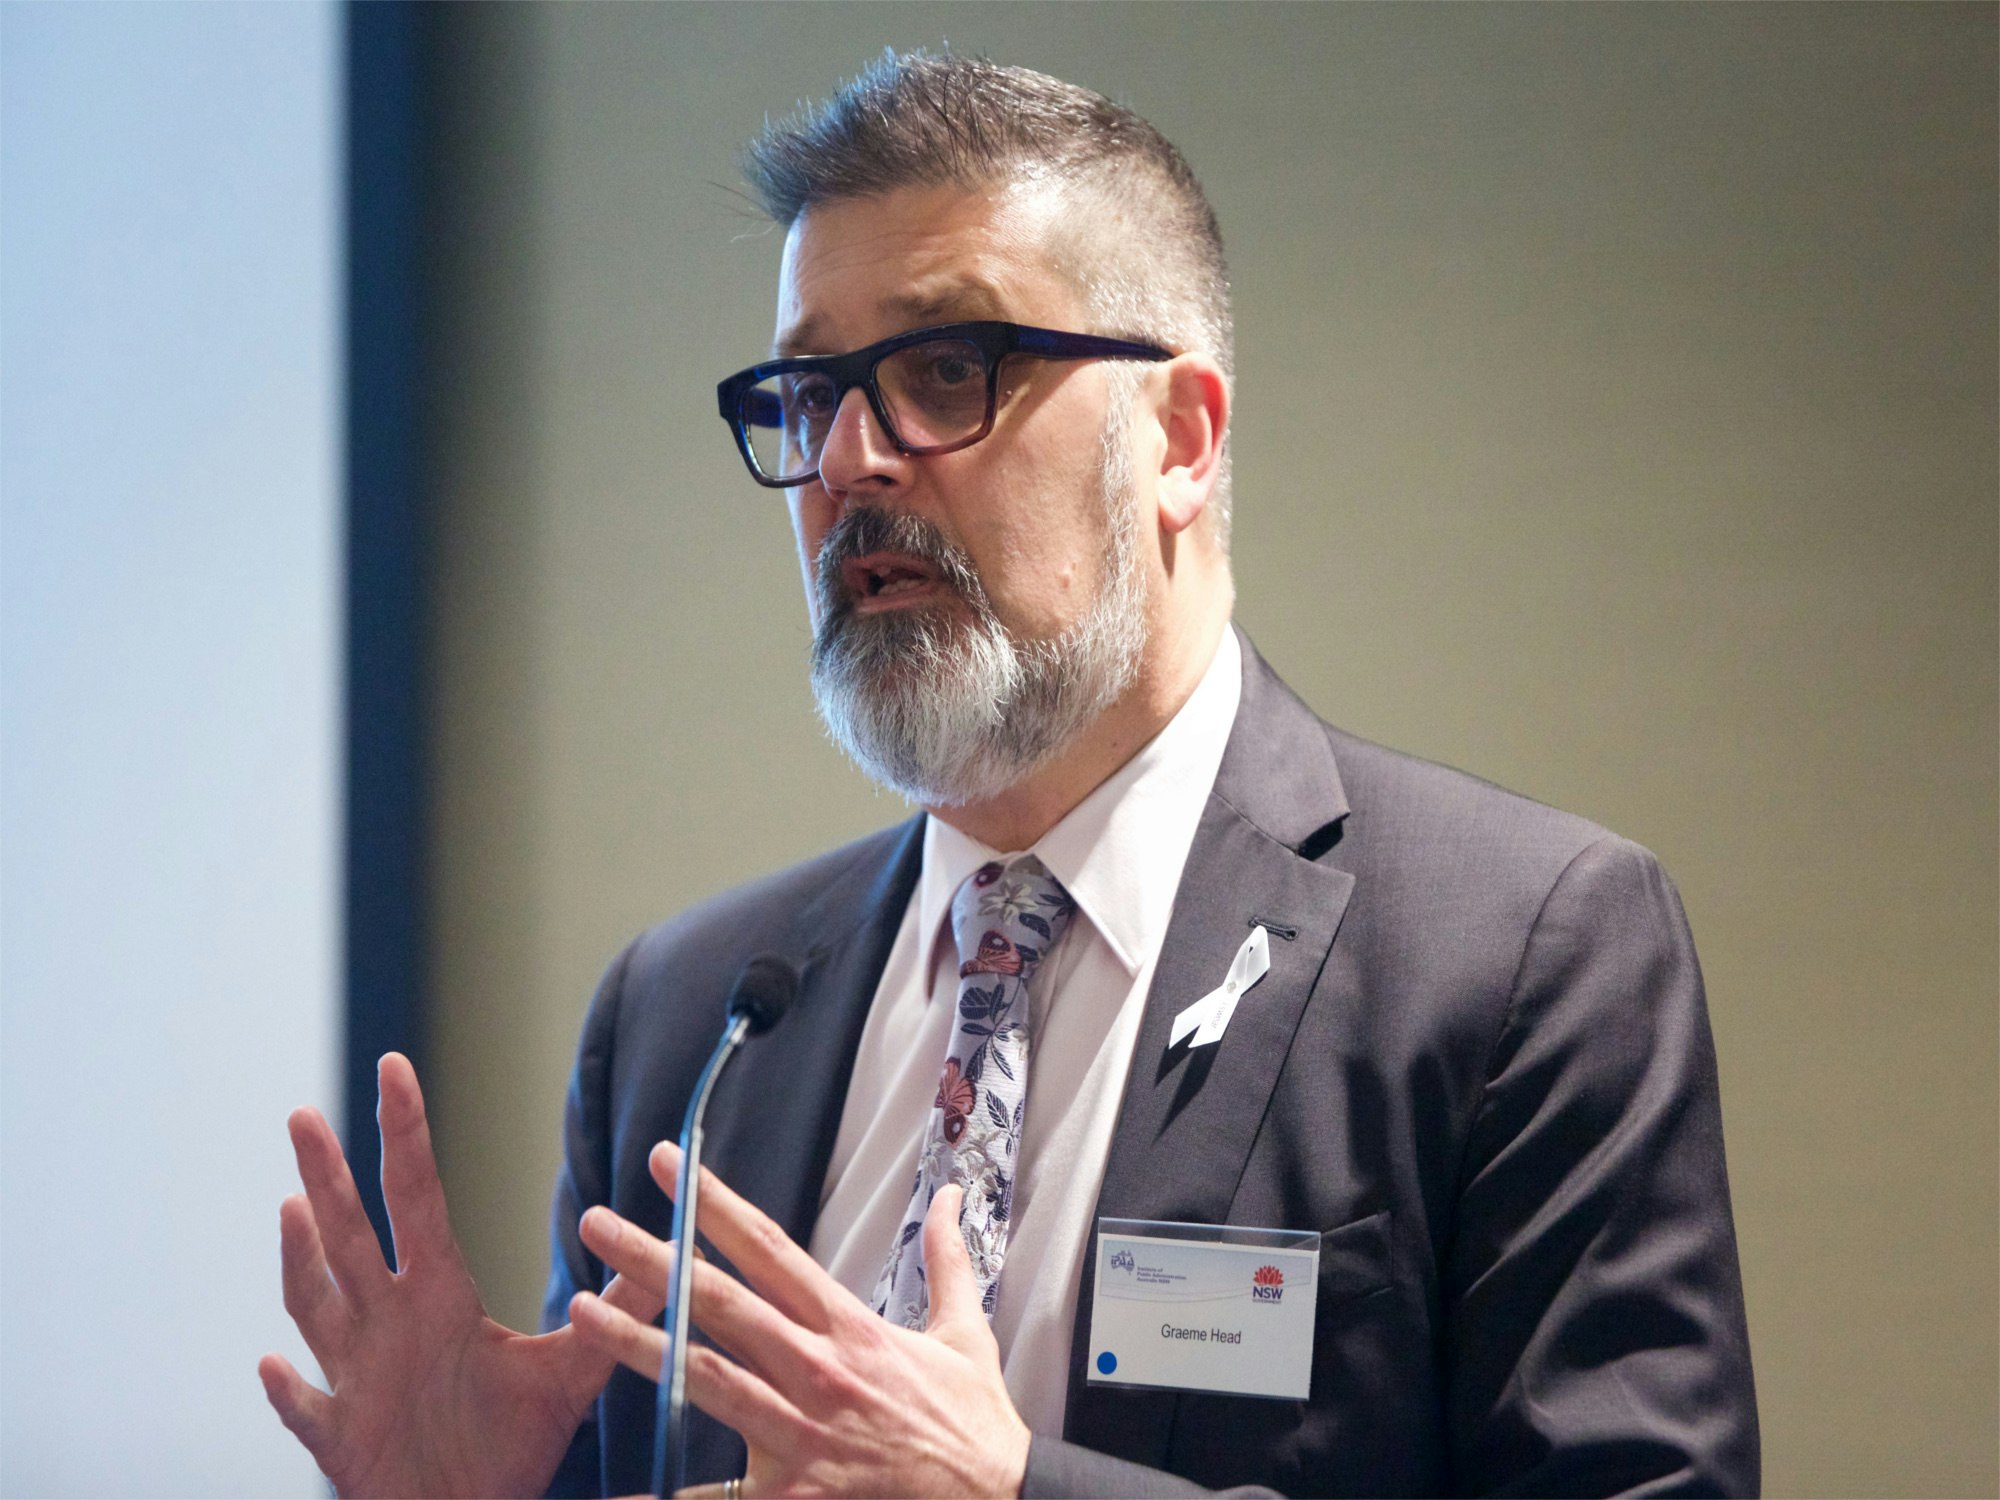 <p>Current NSW Public Service Commissioner Graeme Head has been chosen to lead the NDIS Quality and Safeguard Commission. (Source: NSW Government)</p>
